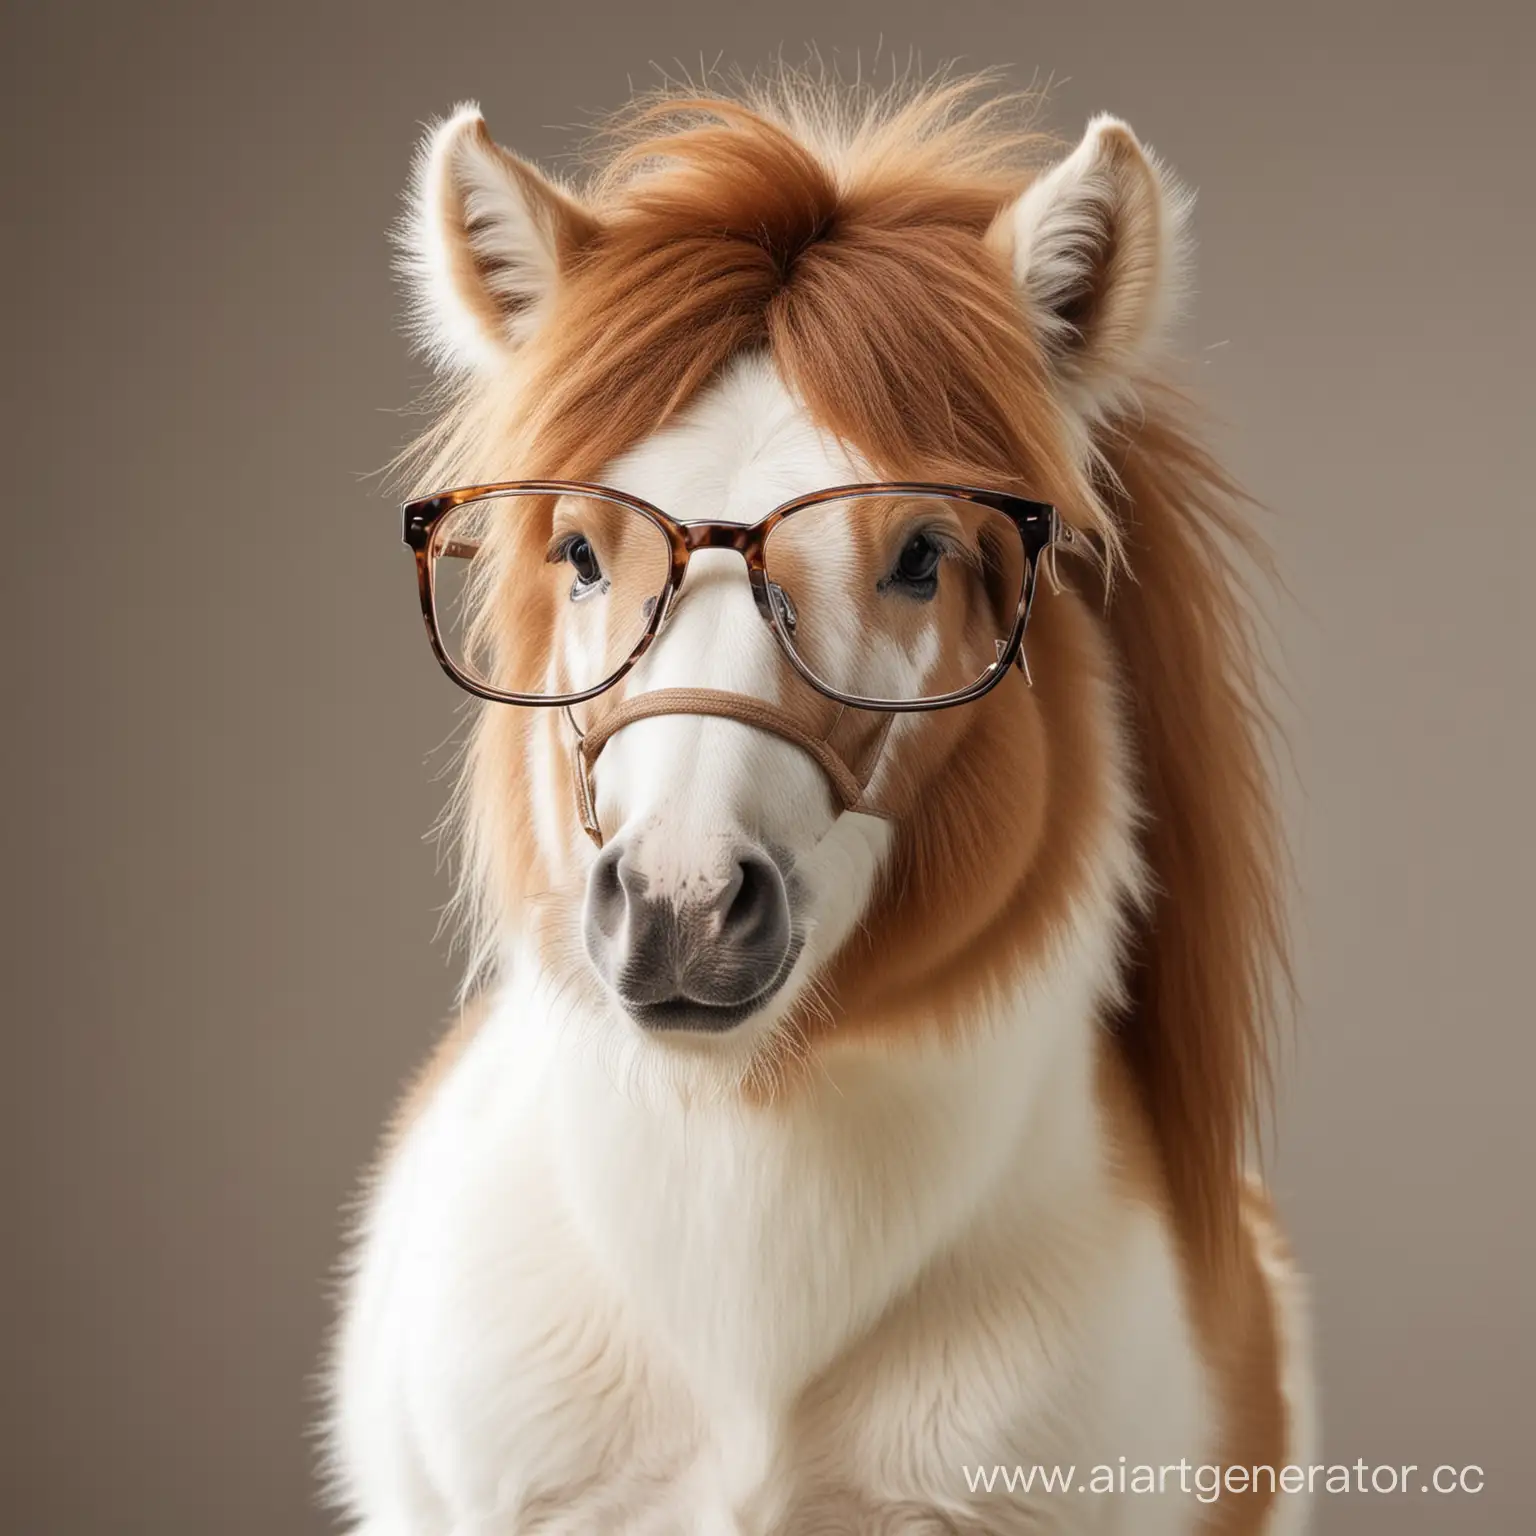 Cute-Brown-and-White-Pony-Wearing-Glasses